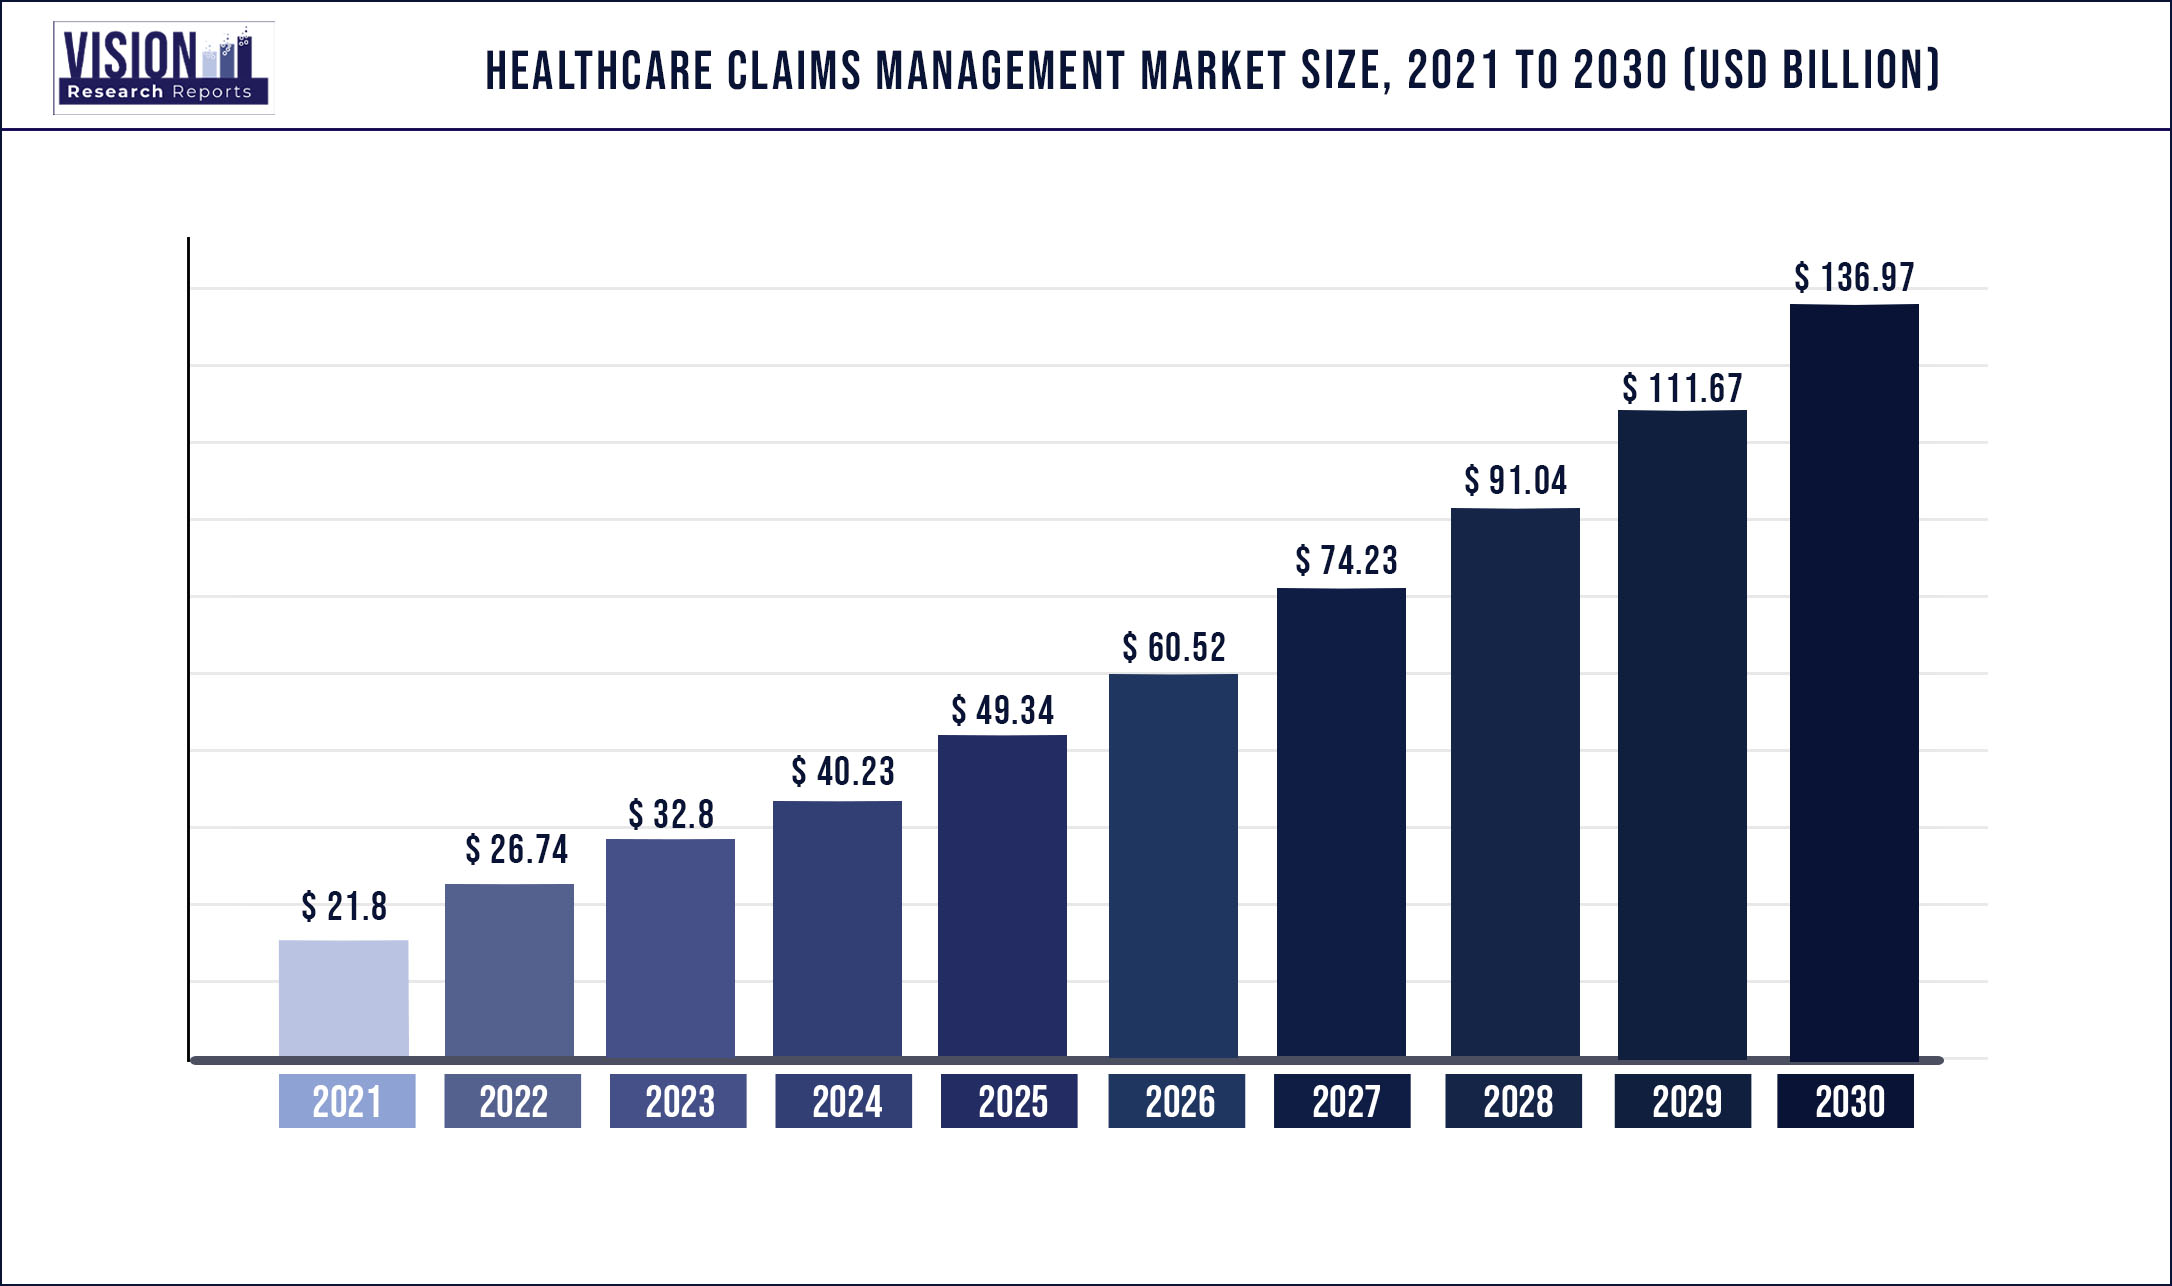 Healthcare Claims Management Market Size 2021 to 2030